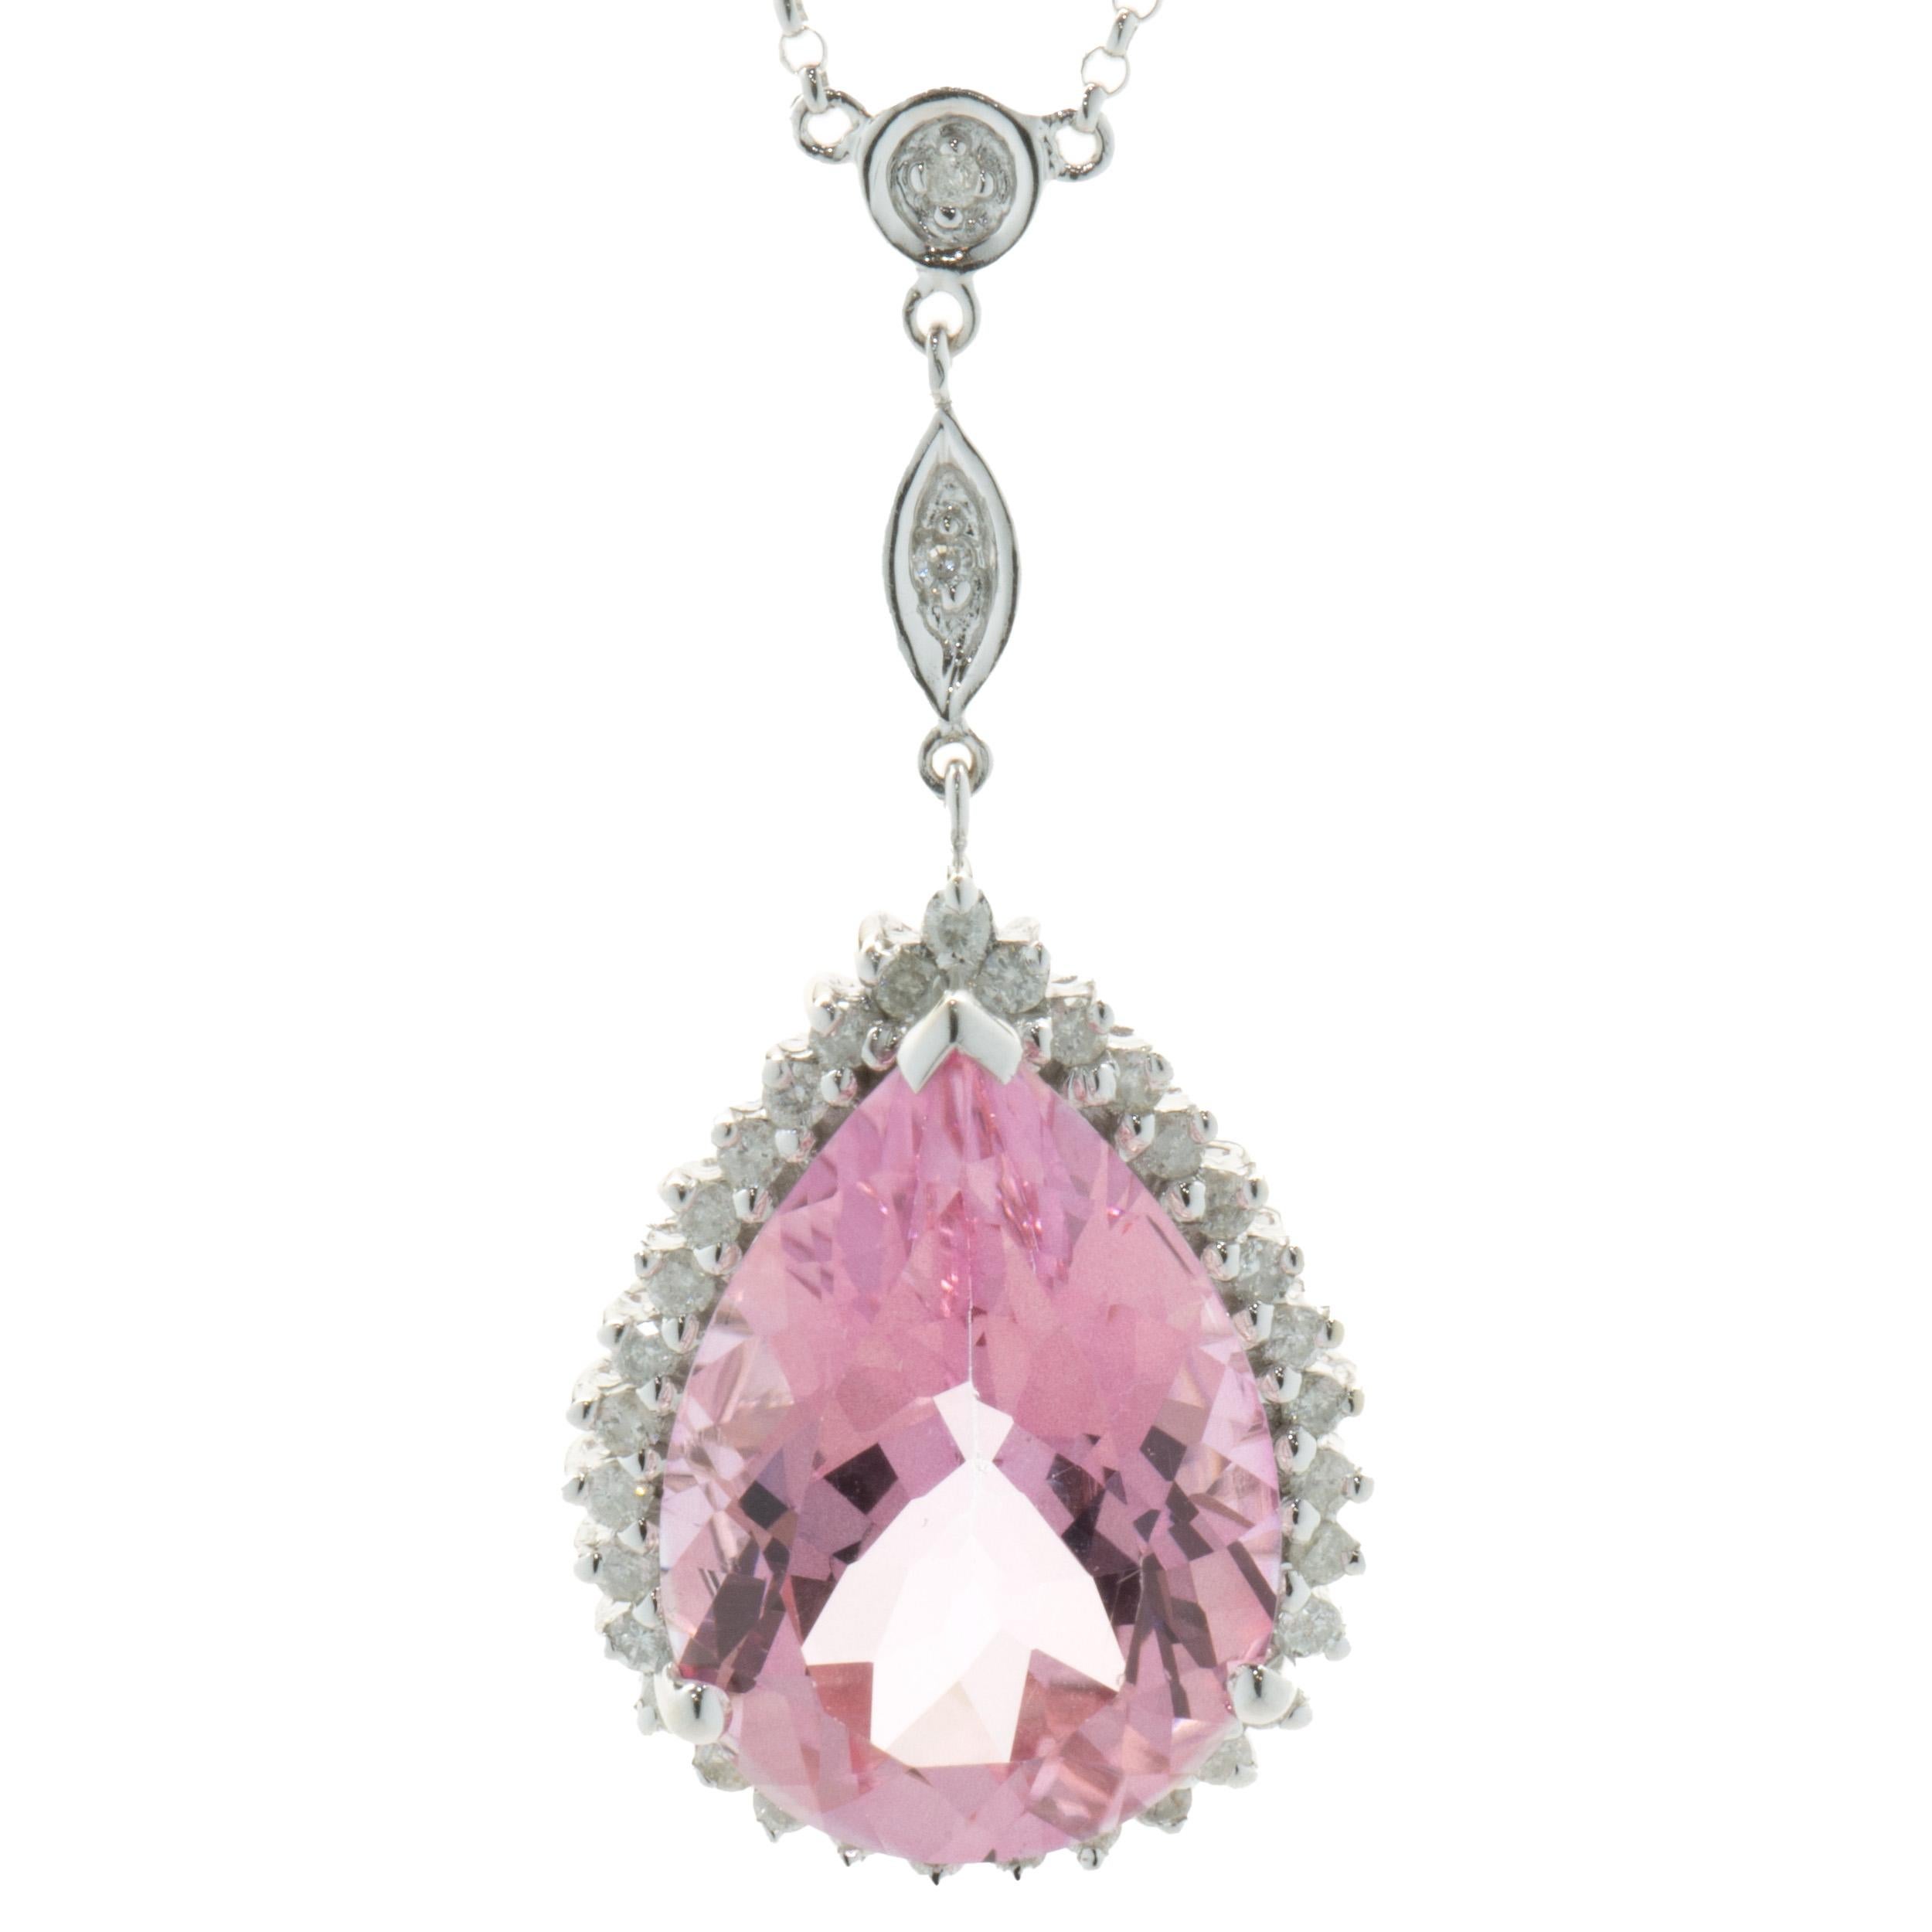 Designer: custom
Material: 14K white gold
Diamond: 83 round brilliant cut = 0.83cttw
Color: G
Clarity: SI1
Pink Topaz: 1 pear cut = 12.50ct
Dimensions: necklace measures 18.25-inches in length
Weight: 11.02 grams